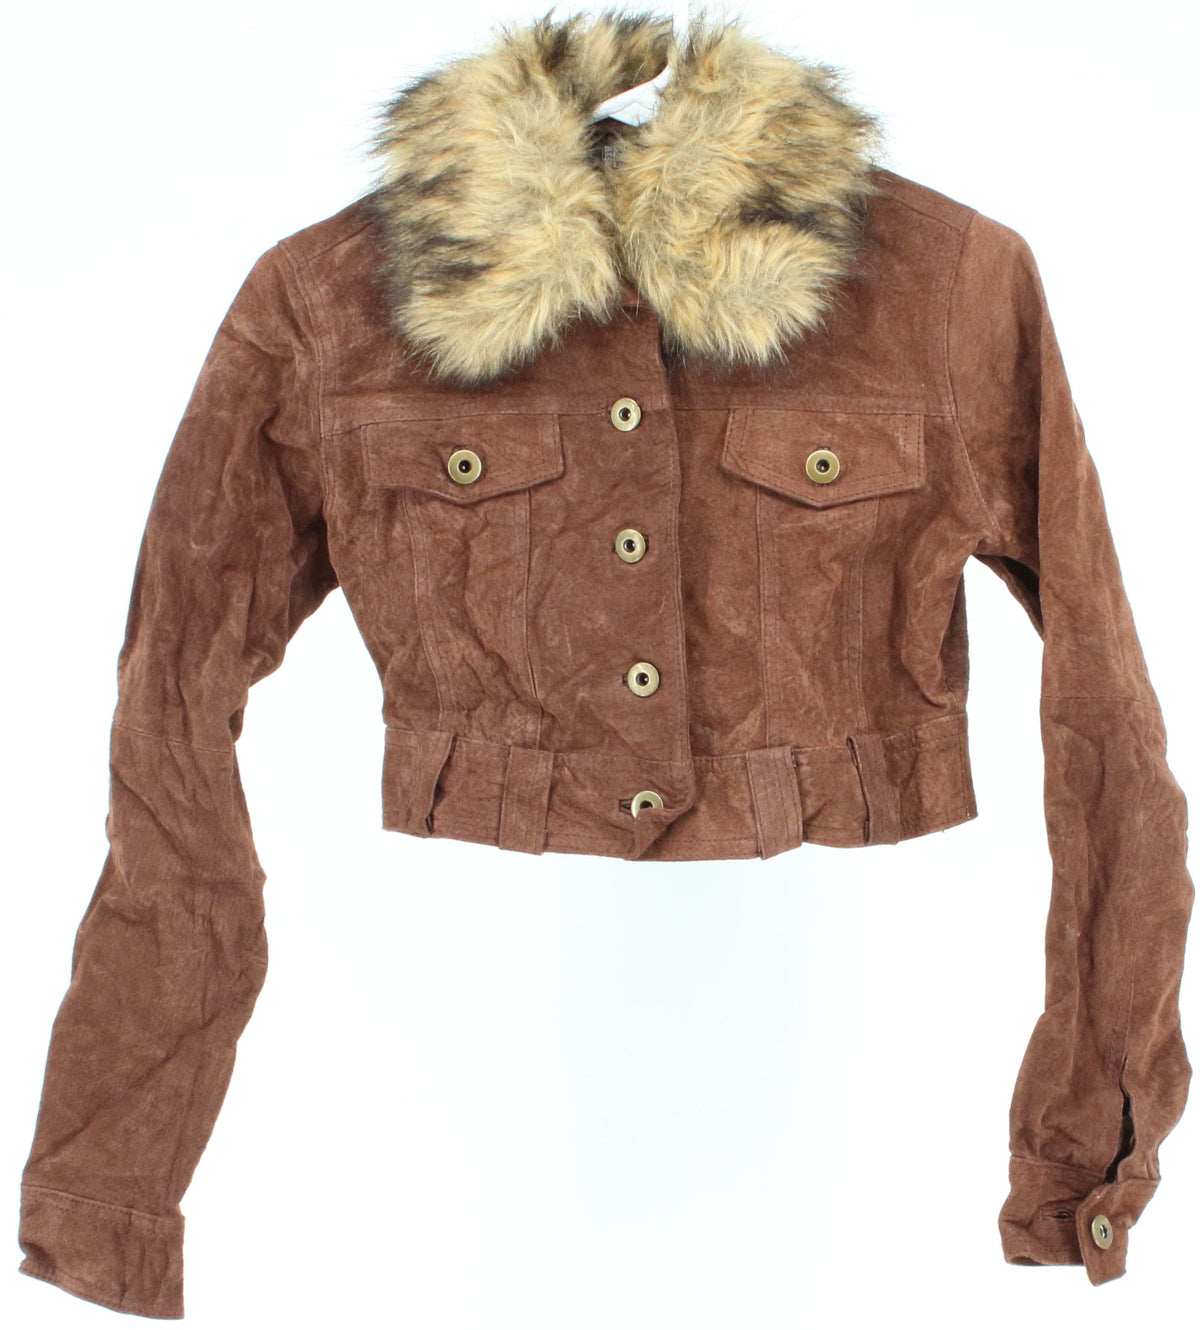 Rue 21 Brown Cropped Leather Jacket With Faux Fur Collar